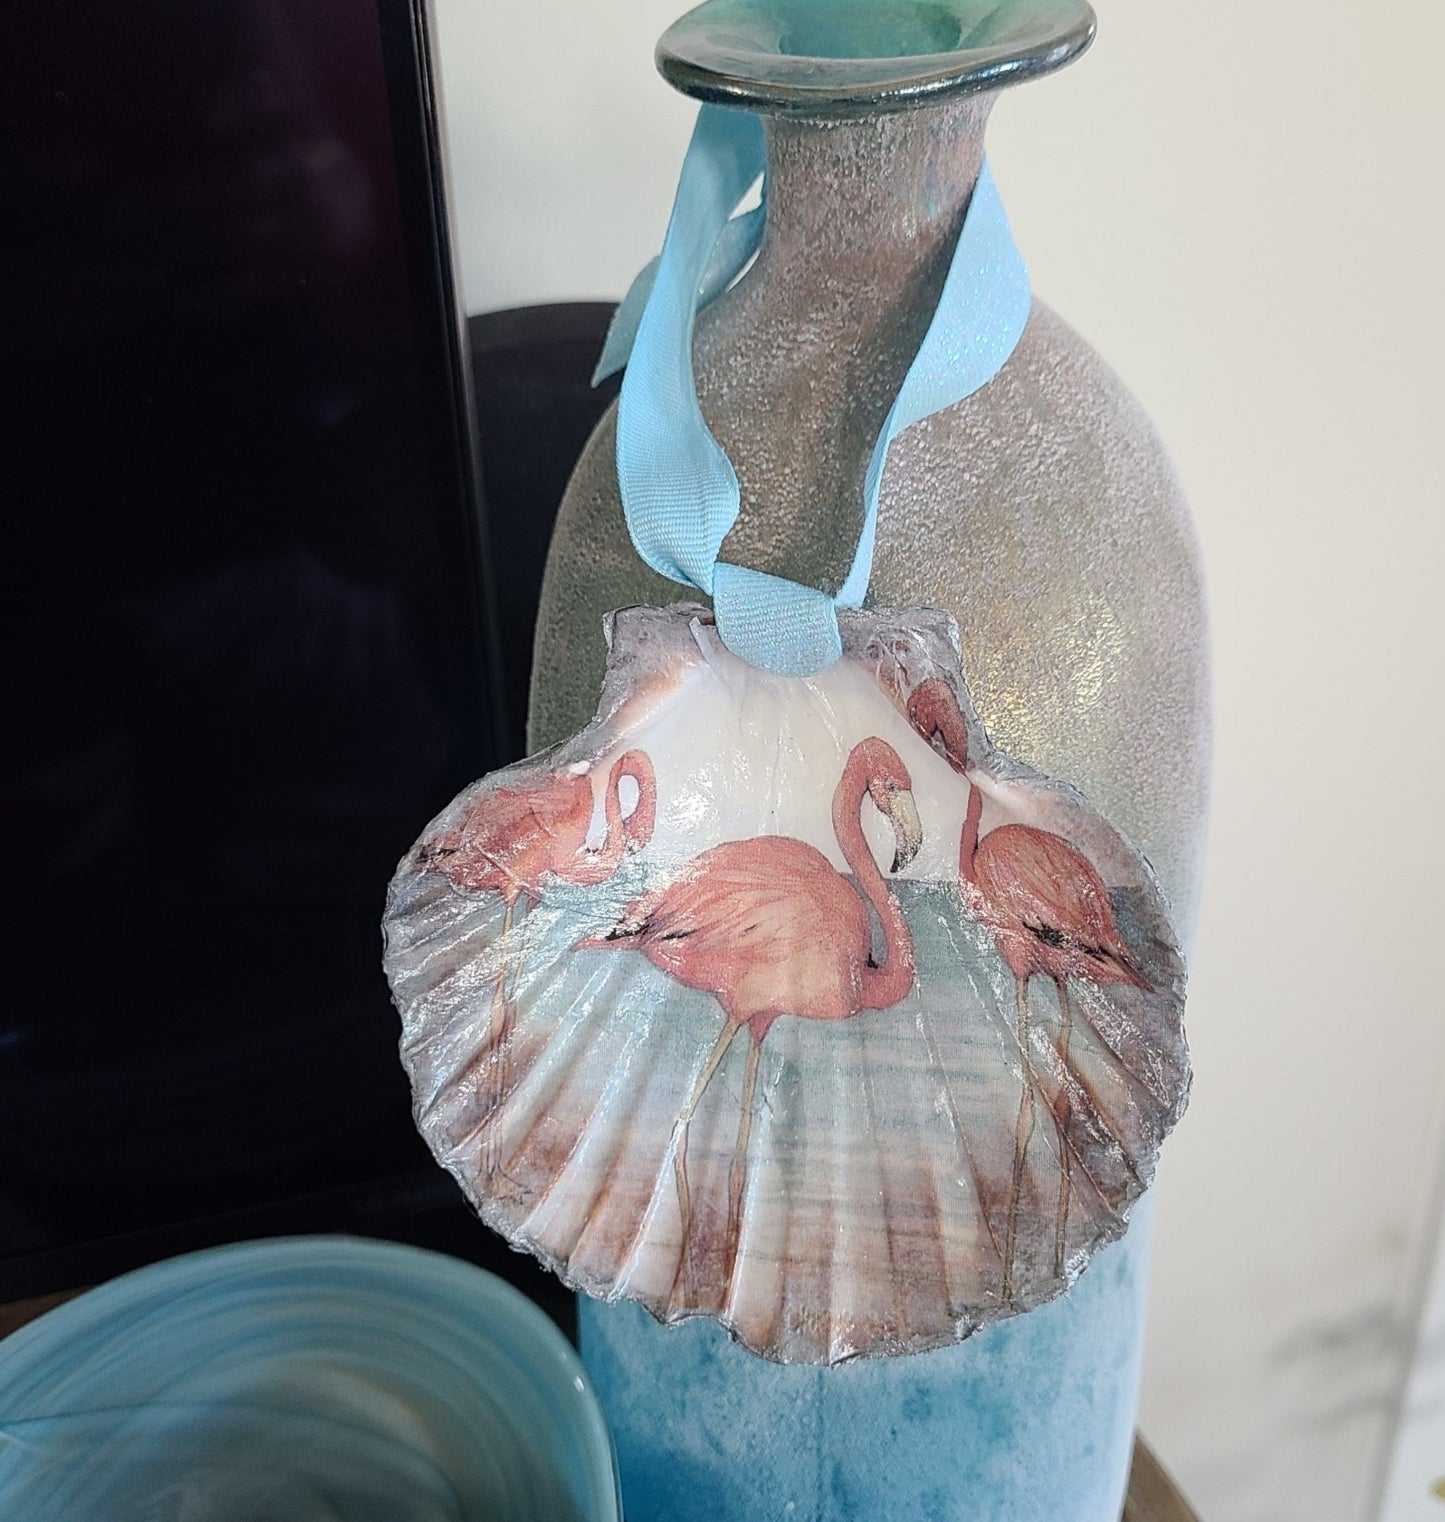 I decorated this clam shell with a design of three flamingos.  The back side looks like wave ripples.  The edges are trimmed in metallic silver.  A blue iridescent ribbon is tied on for hanging.  Acessories shown are NOT included.  Approximate size: Shell: 4 x 4.25 inches